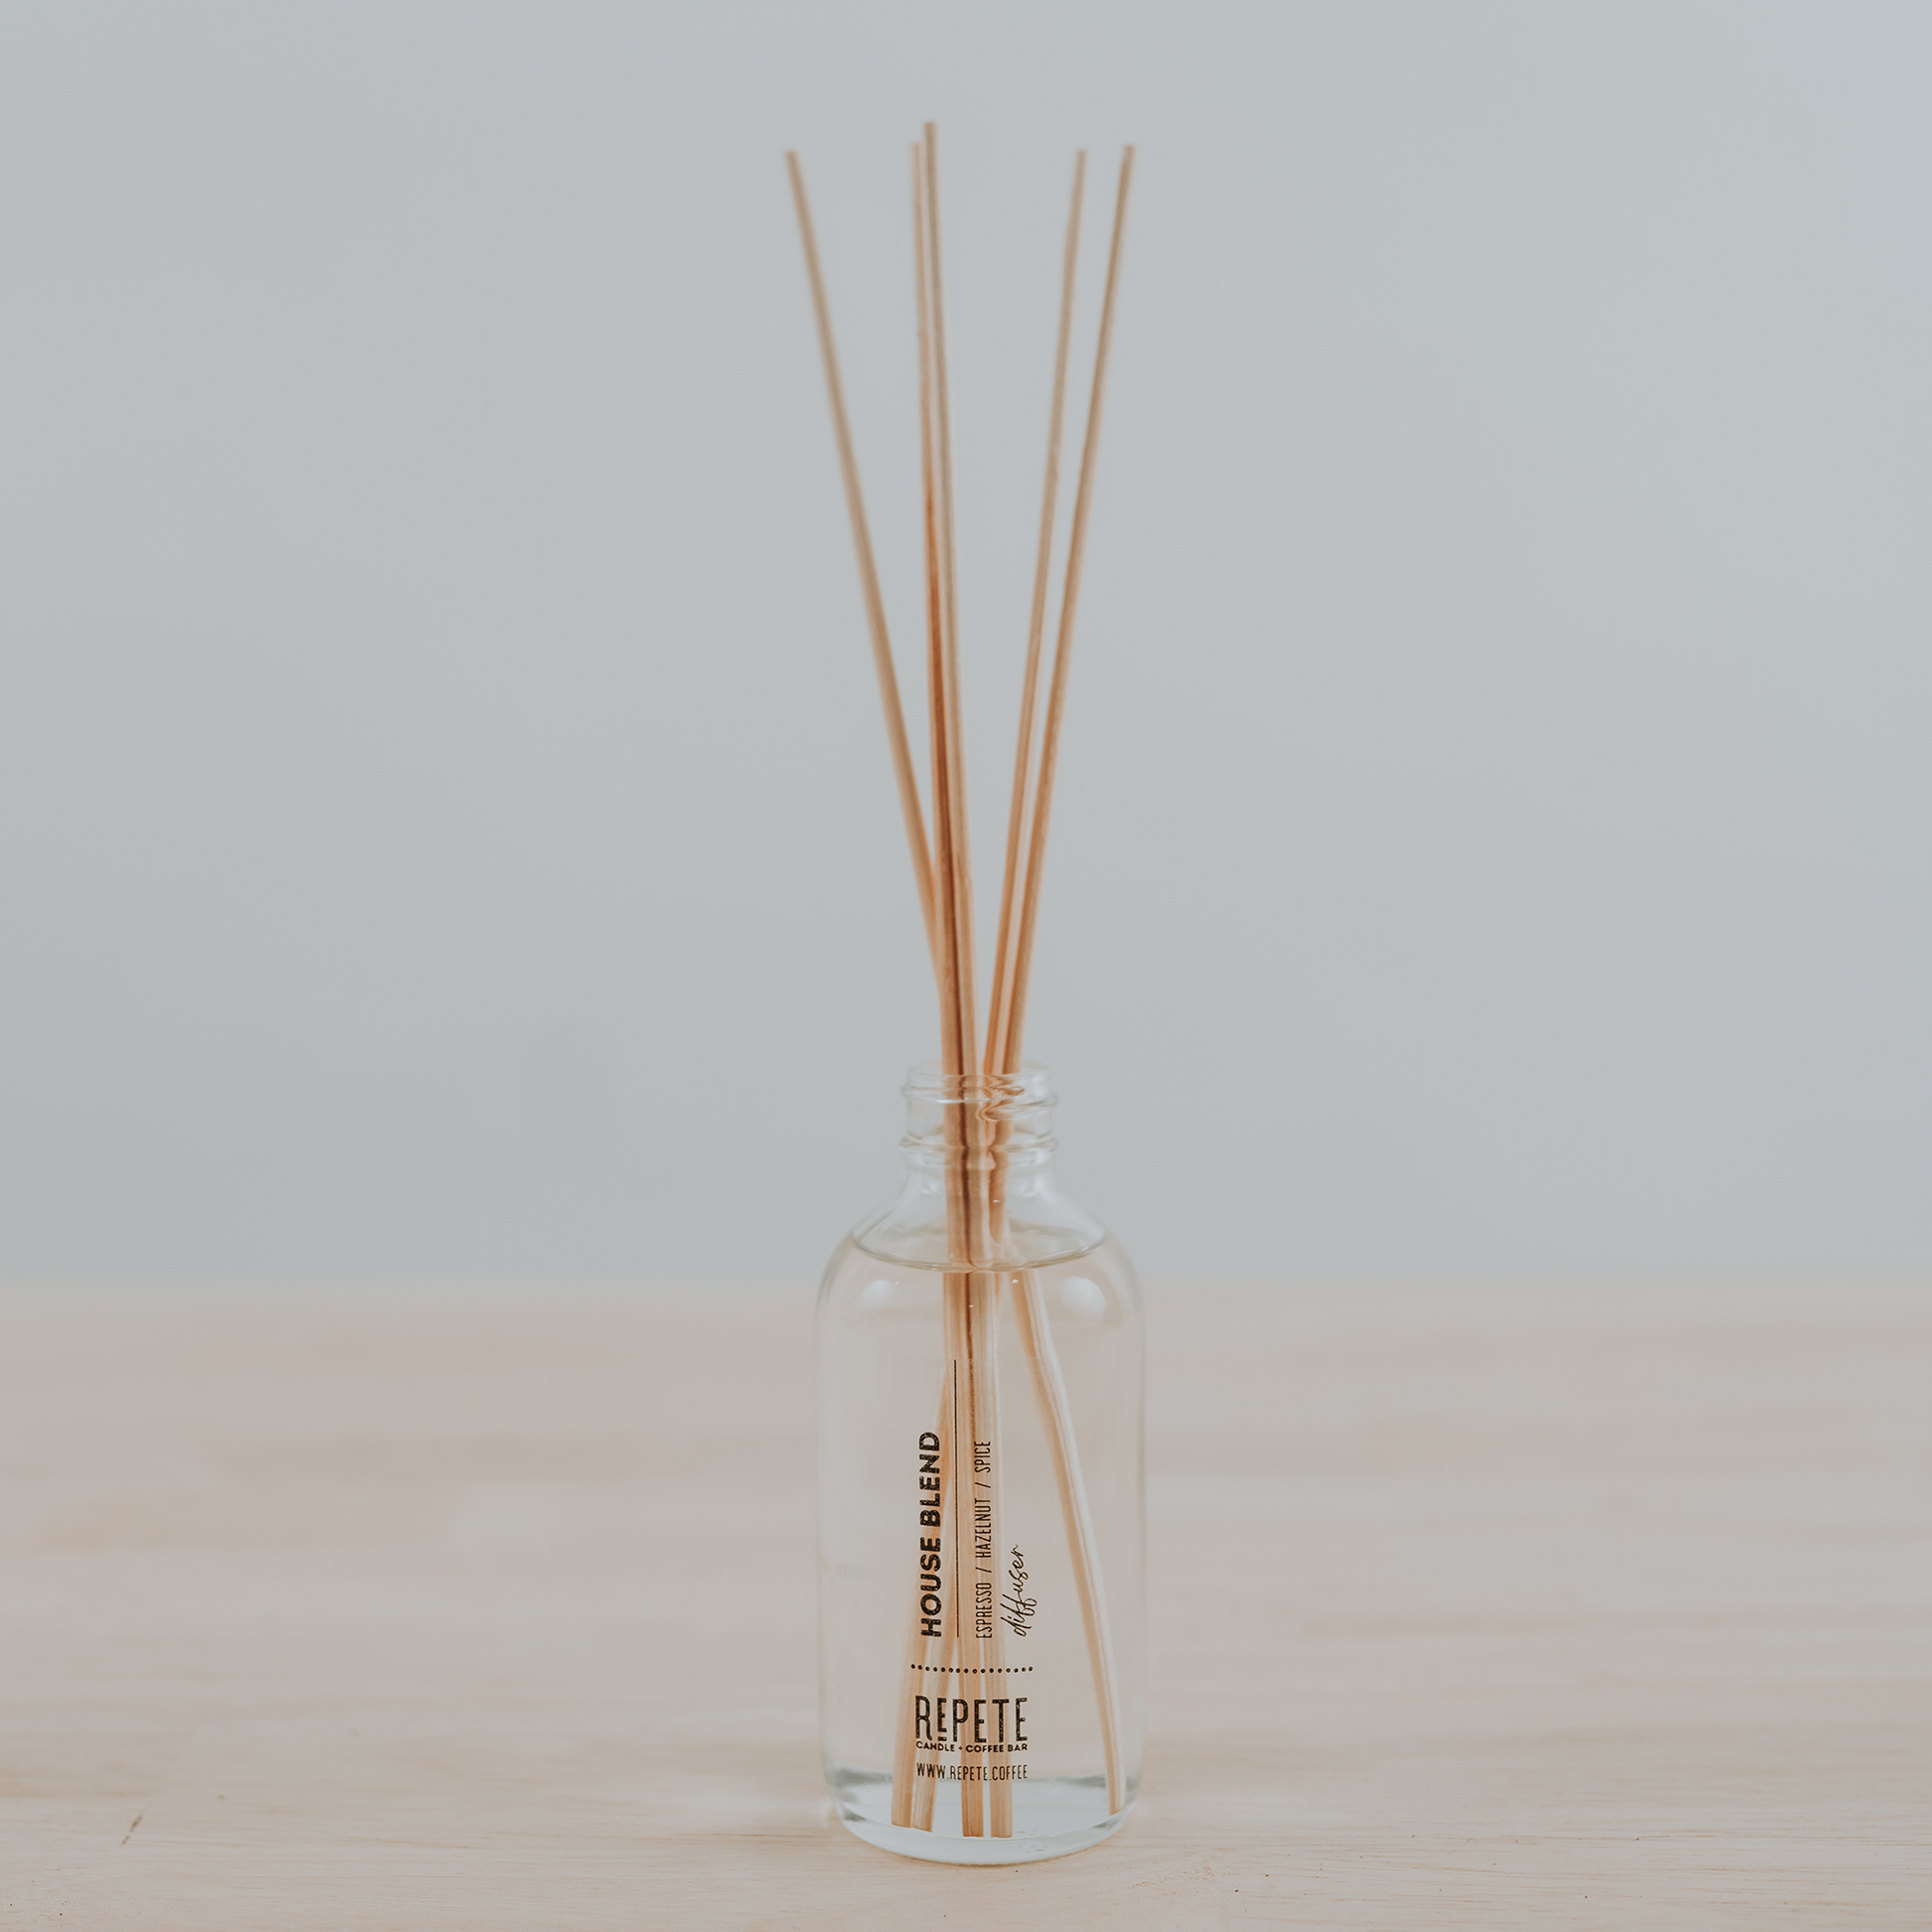 House Blend diffuser from Repete Candle and Coffee Bar